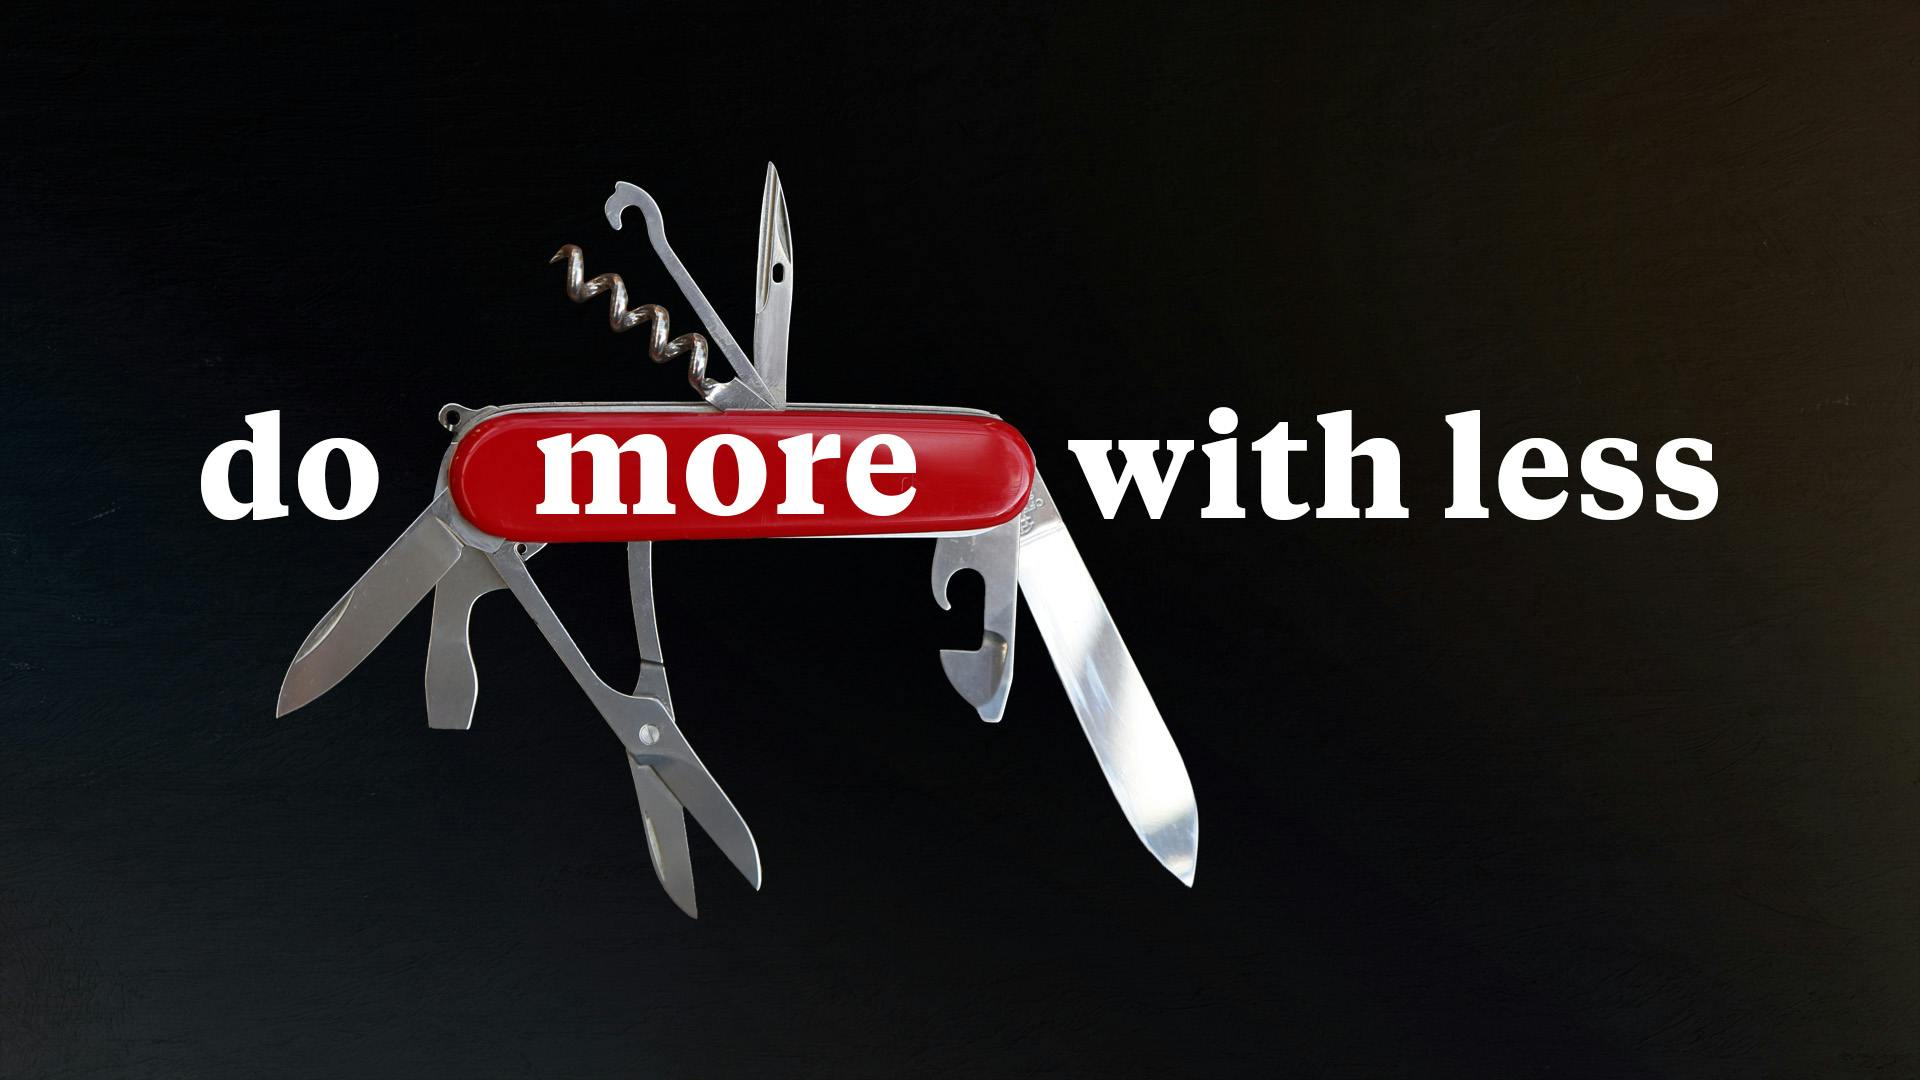 swiss army knife with the text "do more with less" on top of it